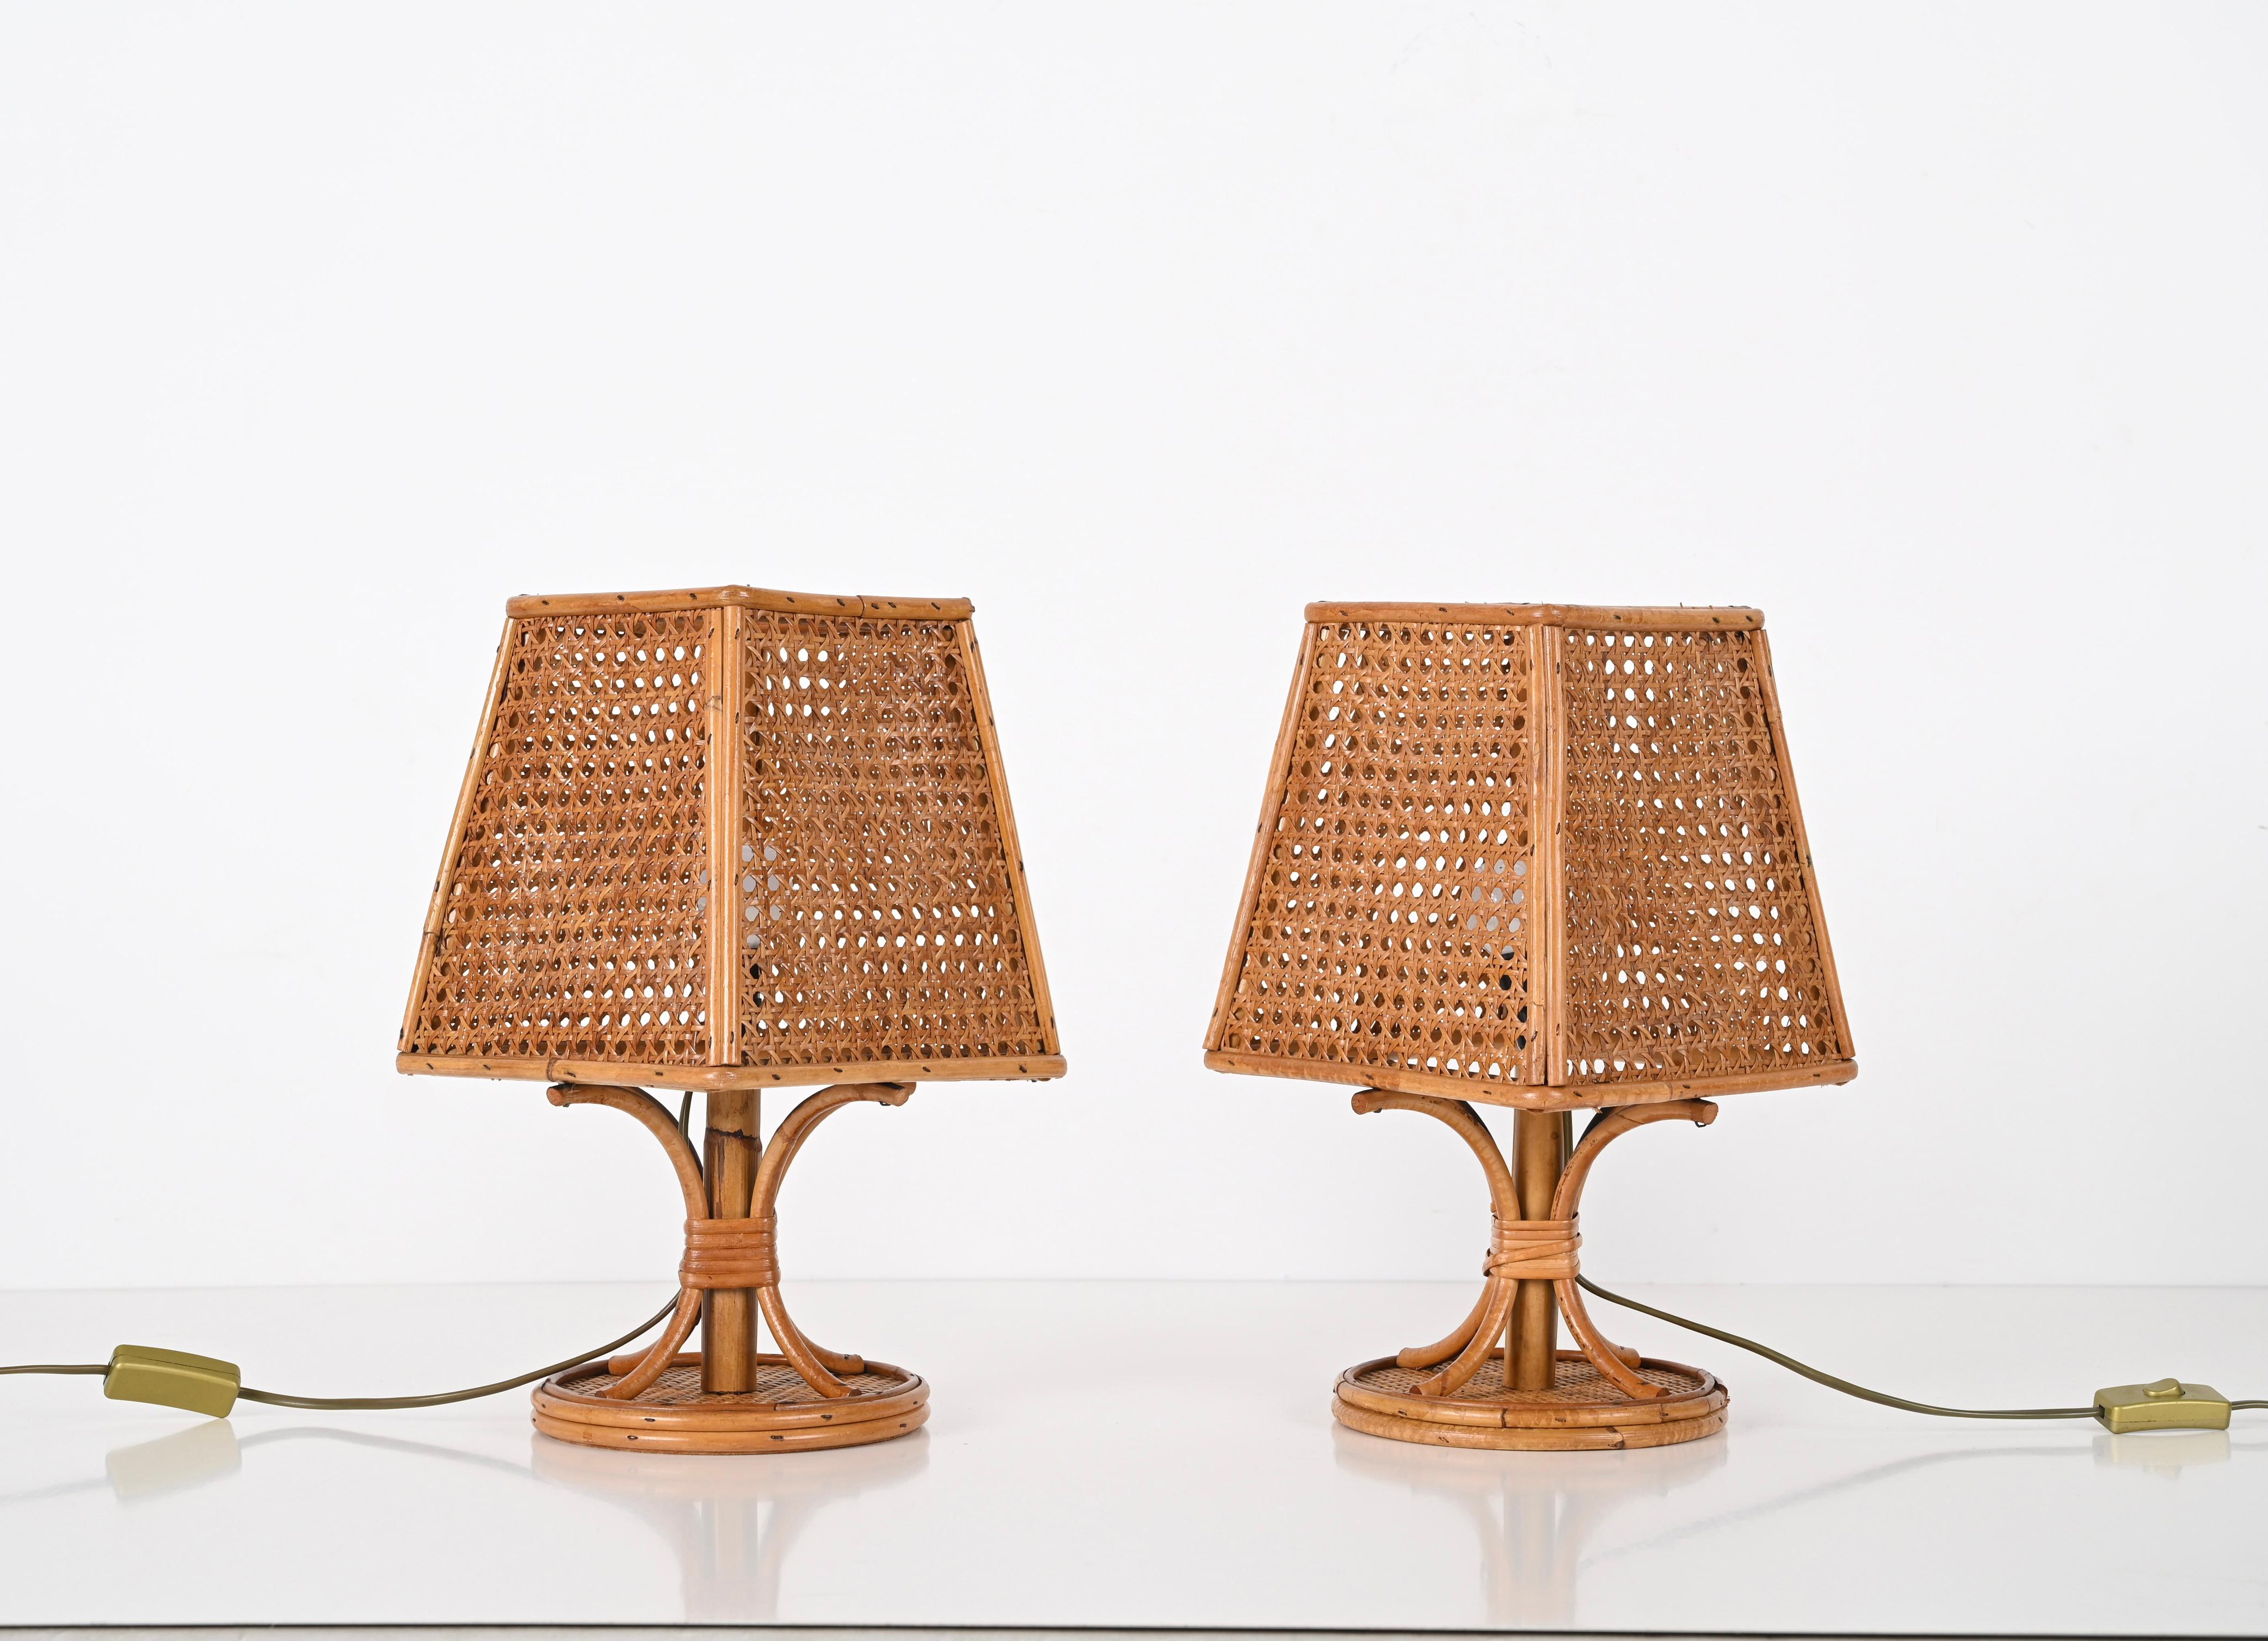 Marvellous pair of midcentury wicker and rattan table lamps. These delightful French Riviera style table lamps were designed and made in Italy in the 1960s.

Fully hand-crafted with perfect proportions, mixing curved rattan, hand-woven Vienna straw